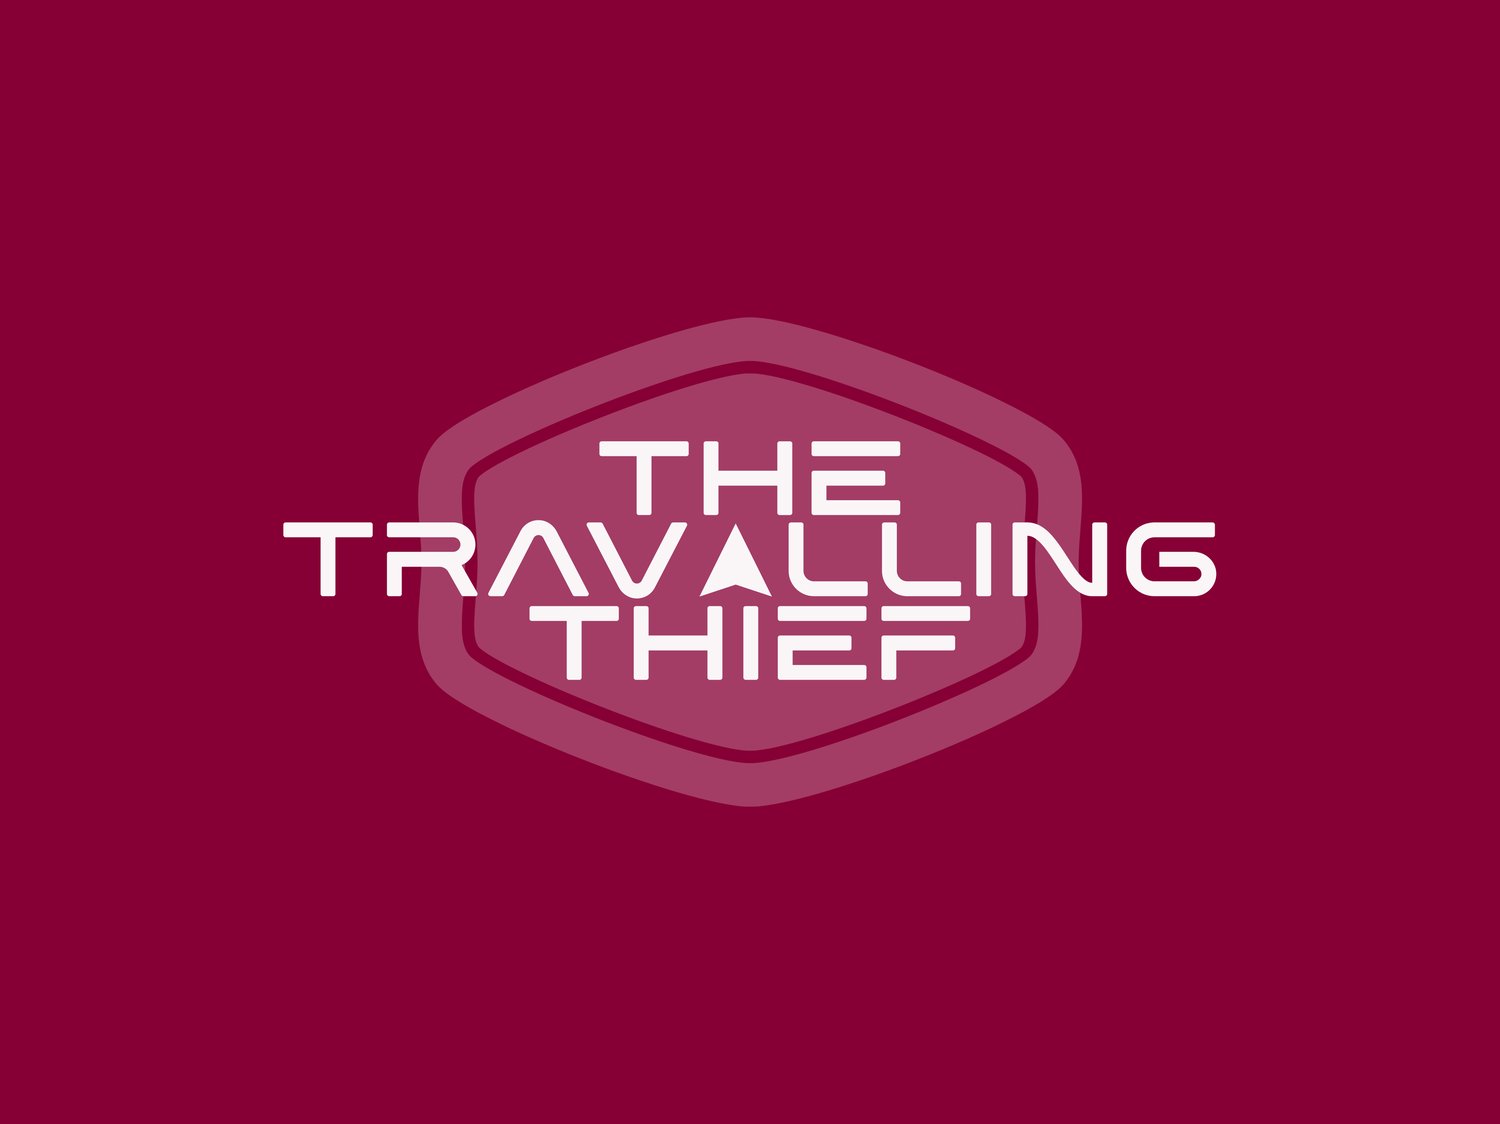 The Travelling Thief